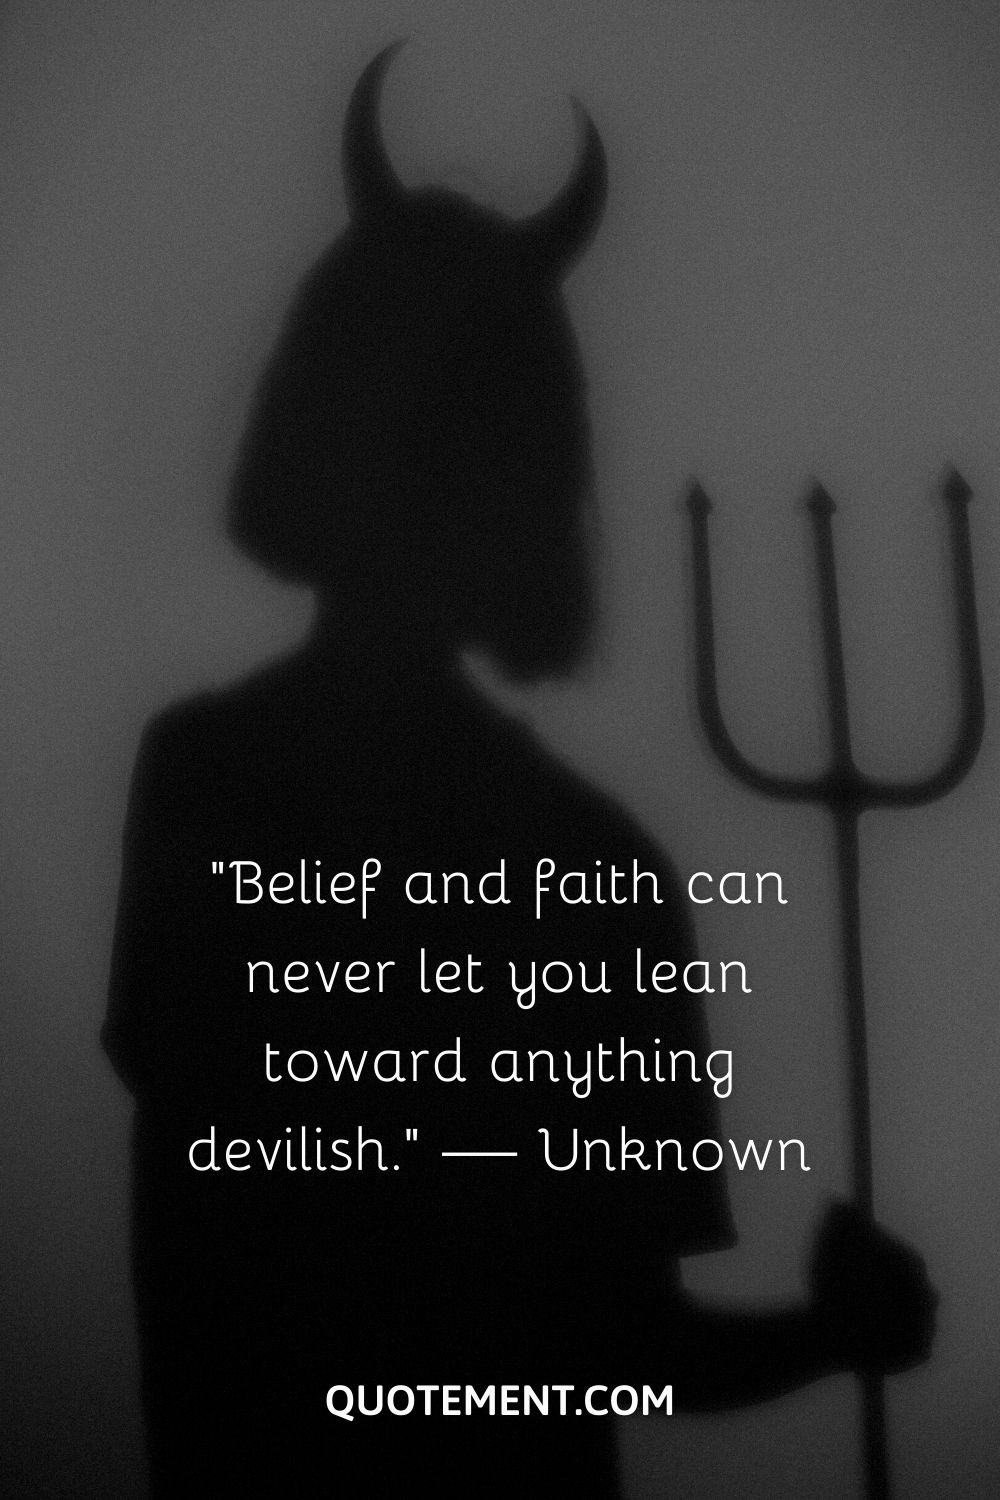 “Belief and faith can never let you lean toward anything devilish.” — Unknown